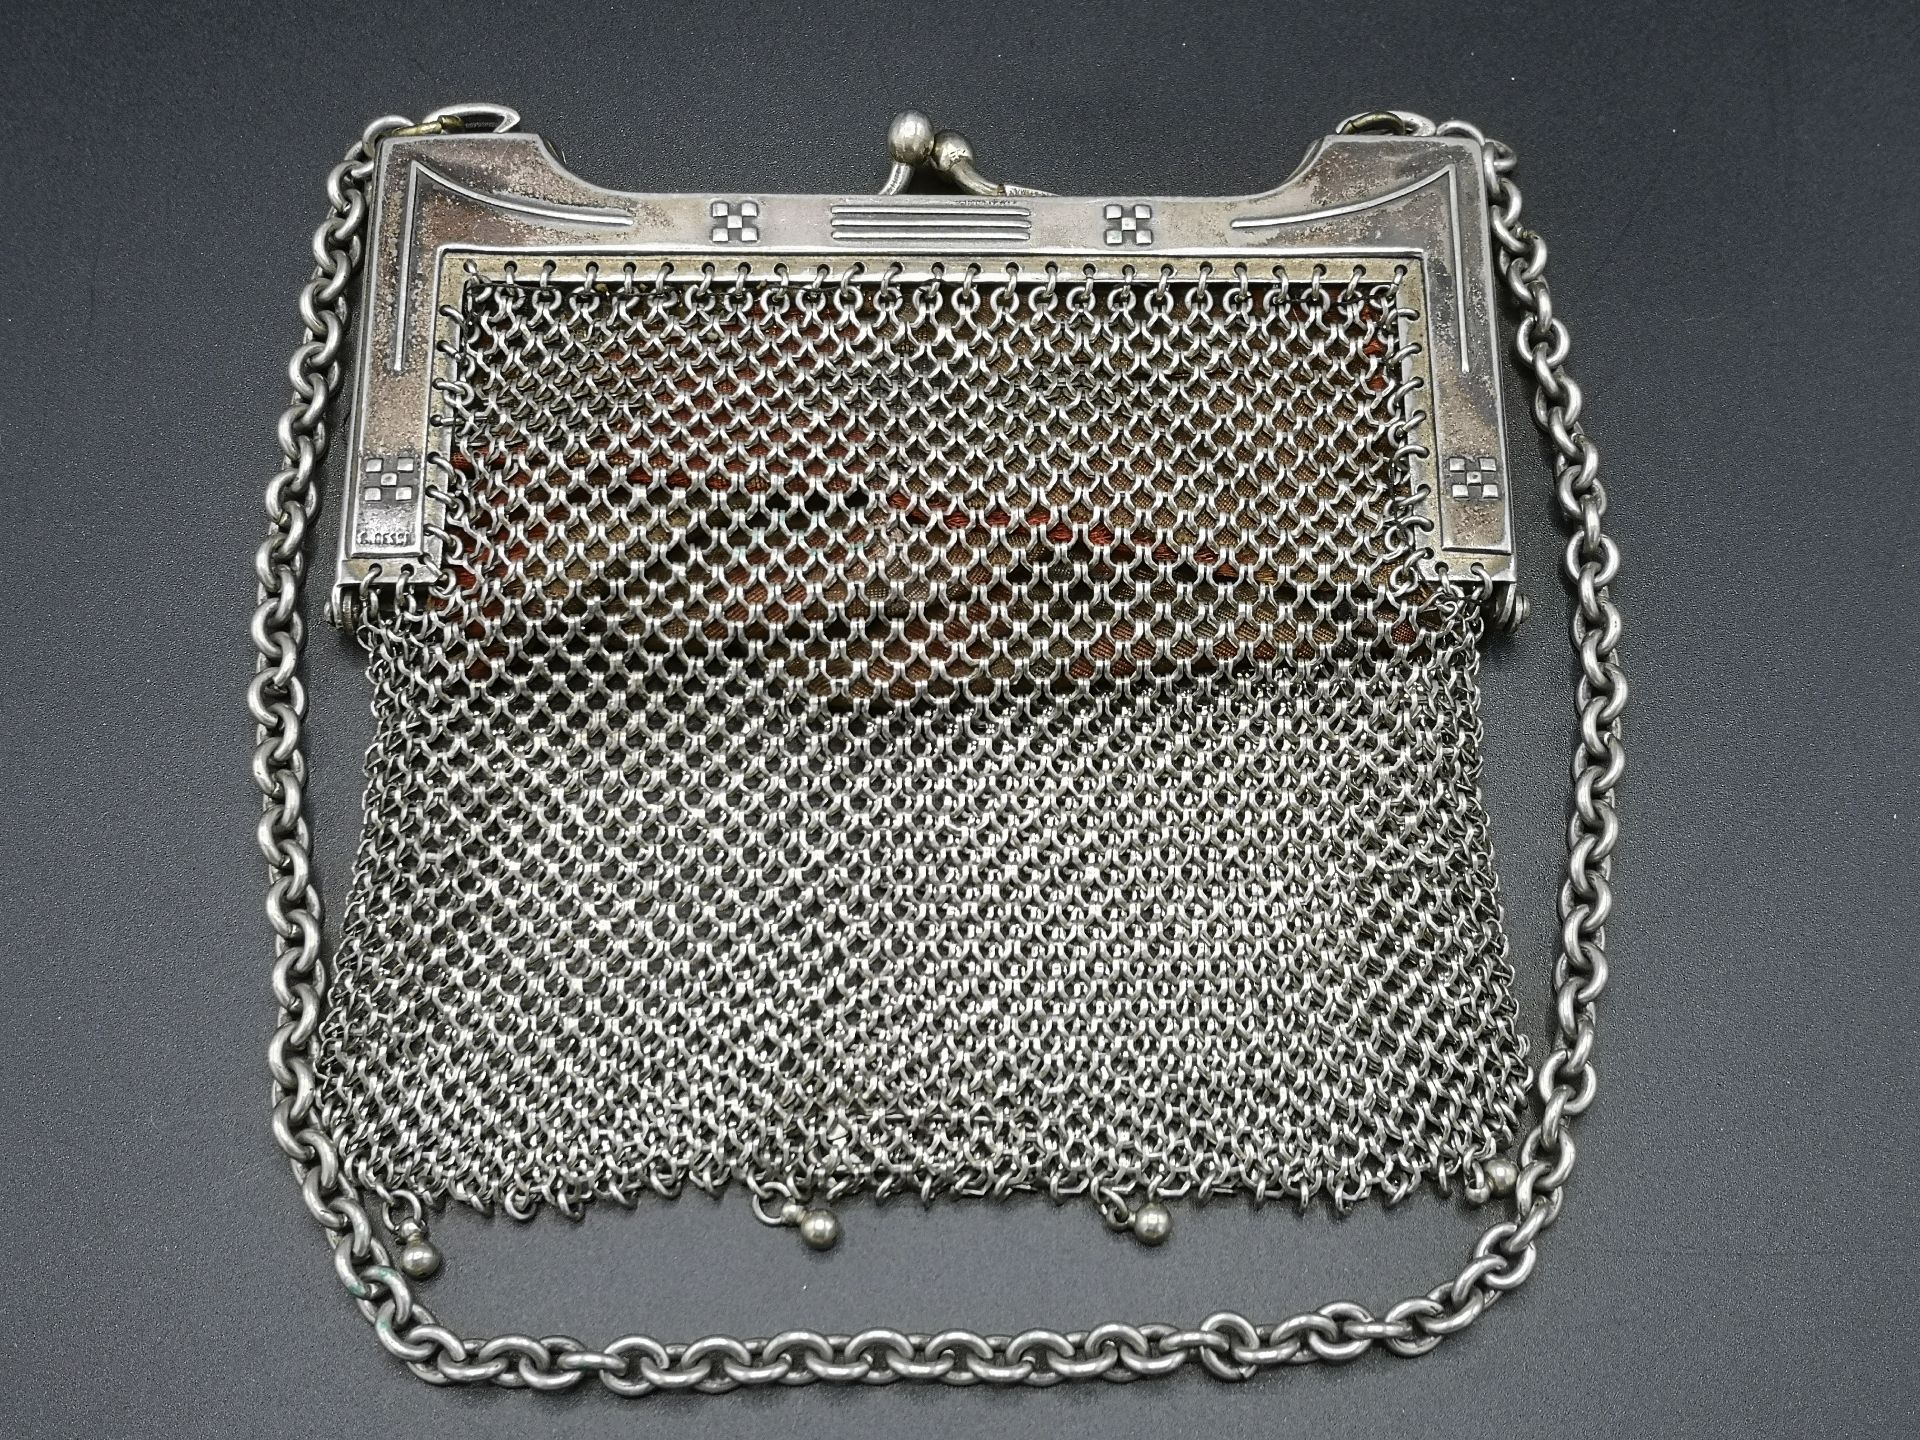 Alpacca mesh purse - Image 4 of 6